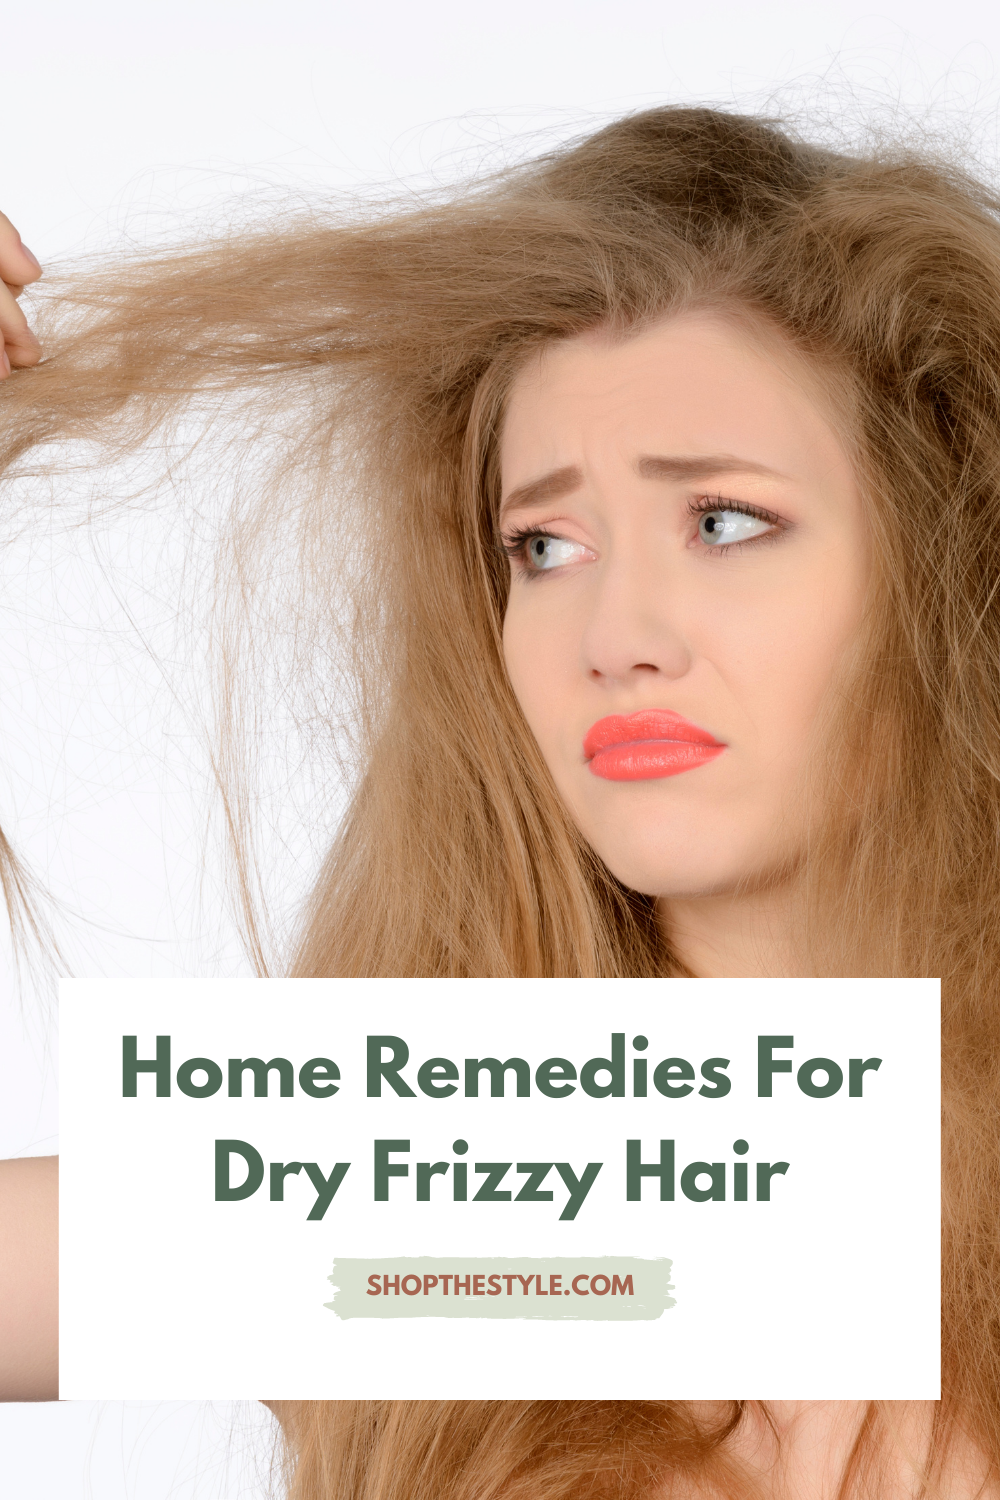 Home Remedies For Dry Frizzy Hair